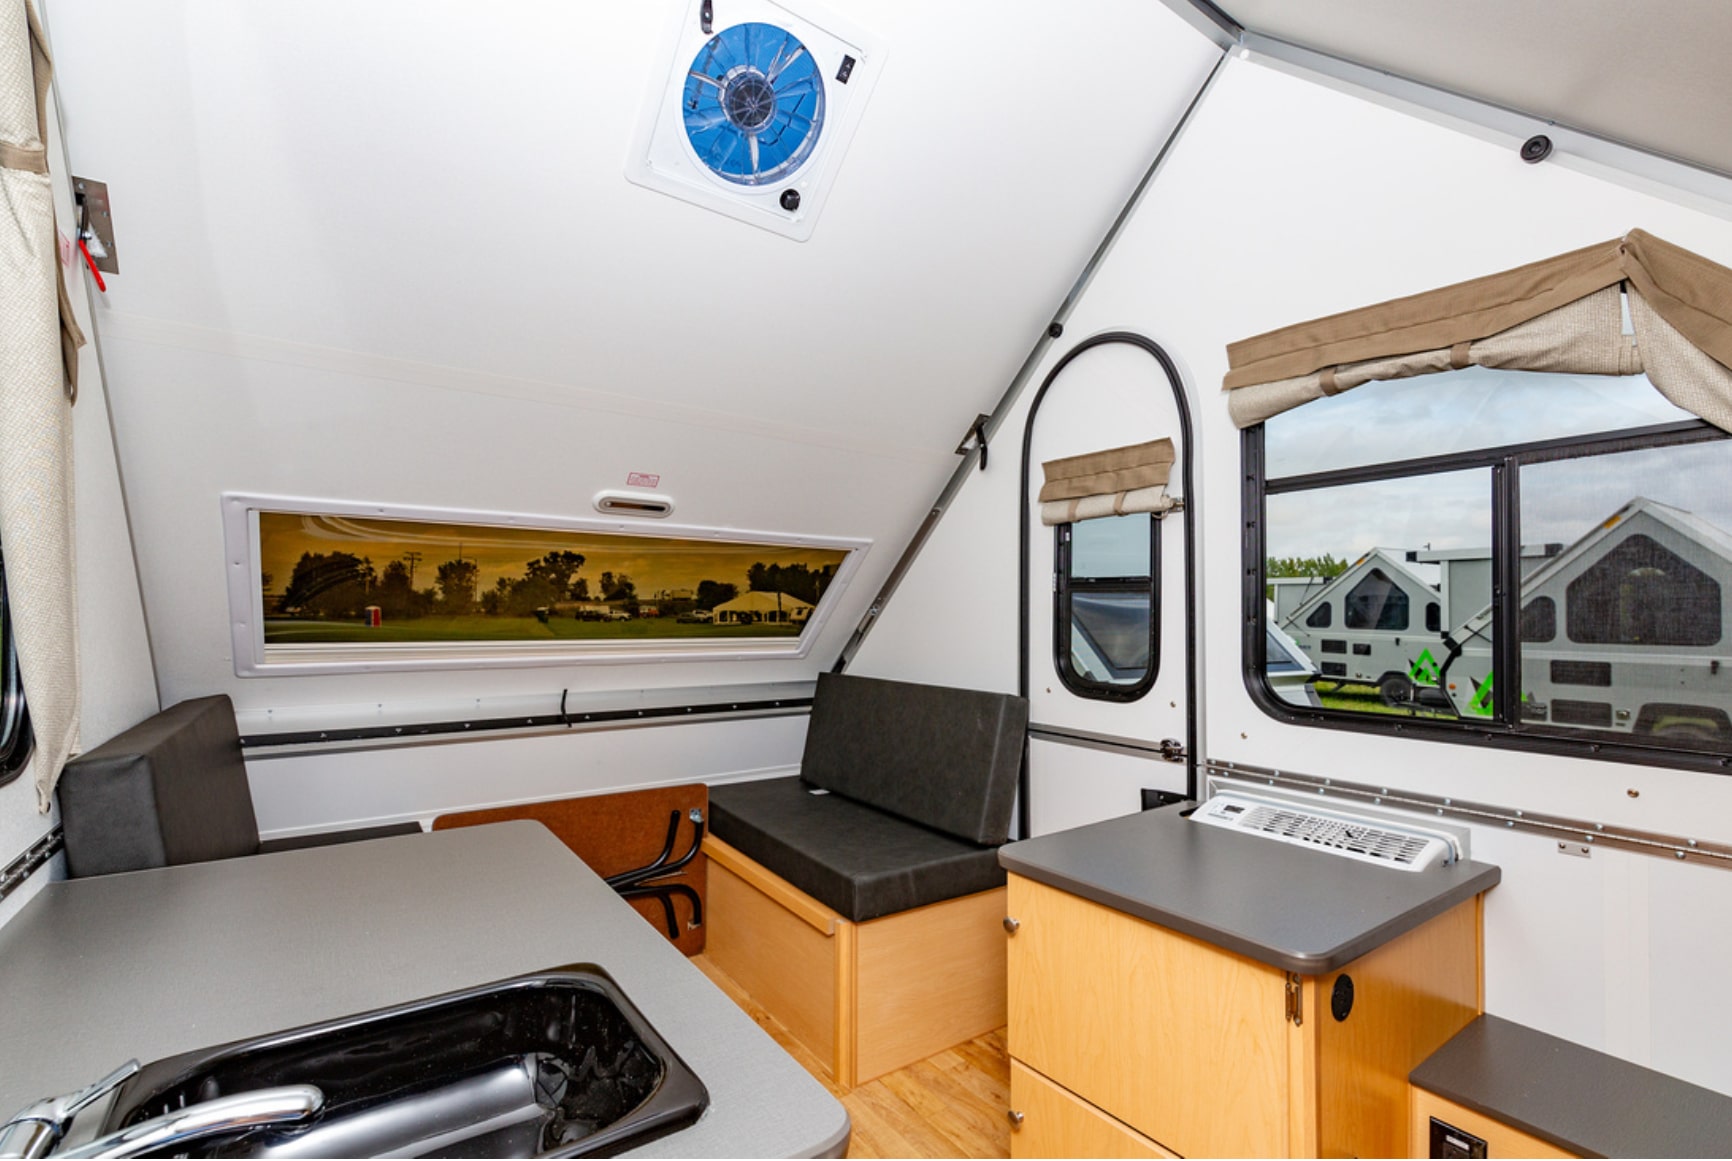 The interior of an rv with a sink and a window.